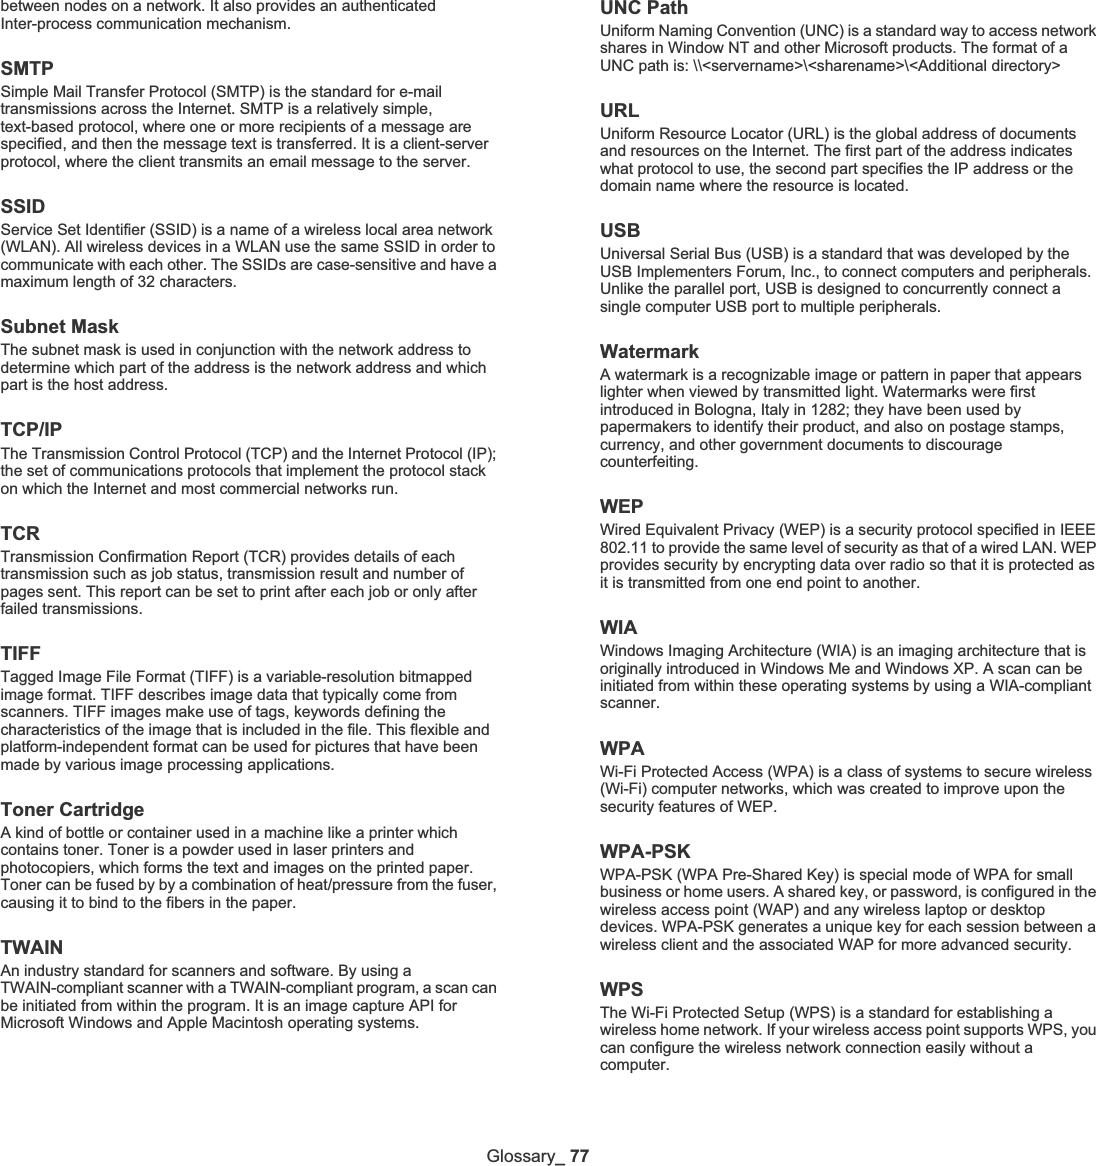 Glossary_ 77between nodes on a network. It also provides an authenticated Inter-process communication mechanism.SMTPSimple Mail Transfer Protocol (SMTP) is the standard for e-mail transmissions across the Internet. SMTP is a relatively simple, text-based protocol, where one or more recipients of a message are specified, and then the message text is transferred. It is a client-server protocol, where the client transmits an email message to the server.SSIDService Set Identifier (SSID) is a name of a wireless local area network (WLAN). All wireless devices in a WLAN use the same SSID in order to communicate with each other. The SSIDs are case-sensitive and have a maximum length of 32 characters.Subnet Mask The subnet mask is used in conjunction with the network address to determine which part of the address is the network address and which part is the host address.TCP/IPThe Transmission Control Protocol (TCP) and the Internet Protocol (IP); the set of communications protocols that implement the protocol stack on which the Internet and most commercial networks run.TCRTransmission Confirmation Report (TCR) provides details of each transmission such as job status, transmission result and number of pages sent. This report can be set to print after each job or only after failed transmissions.TIFFTagged Image File Format (TIFF) is a variable-resolution bitmapped image format. TIFF describes image data that typically come from scanners. TIFF images make use of tags, keywords defining the characteristics of the image that is included in the file. This flexible and platform-independent format can be used for pictures that have been made by various image processing applications.Toner CartridgeA kind of bottle or container used in a machine like a printer which contains toner. Toner is a powder used in laser printers and photocopiers, which forms the text and images on the printed paper. Toner can be fused by by a combination of heat/pressure from the fuser, causing it to bind to the fibers in the paper.TWAINAn industry standard for scanners and software. By using a TWAIN-compliant scanner with a TWAIN-compliant program, a scan can be initiated from within the program. It is an image capture API for Microsoft Windows and Apple Macintosh operating systems.UNC PathUniform Naming Convention (UNC) is a standard way to access network shares in Window NT and other Microsoft products. The format of a UNC path is: \\&lt;servername&gt;\&lt;sharename&gt;\&lt;Additional directory&gt;URLUniform Resource Locator (URL) is the global address of documents and resources on the Internet. The first part of the address indicates what protocol to use, the second part specifies the IP address or the domain name where the resource is located.USBUniversal Serial Bus (USB) is a standard that was developed by the USB Implementers Forum, Inc., to connect computers and peripherals. Unlike the parallel port, USB is designed to concurrently connect a single computer USB port to multiple peripherals.WatermarkA watermark is a recognizable image or pattern in paper that appears lighter when viewed by transmitted light. Watermarks were first introduced in Bologna, Italy in 1282; they have been used by papermakers to identify their product, and also on postage stamps, currency, and other government documents to discourage counterfeiting.WEPWired Equivalent Privacy (WEP) is a security protocol specified in IEEE 802.11 to provide the same level of security as that of a wired LAN. WEP provides security by encrypting data over radio so that it is protected as it is transmitted from one end point to another.WIAWindows Imaging Architecture (WIA) is an imaging architecture that is originally introduced in Windows Me and Windows XP. A scan can be initiated from within these operating systems by using a WIA-compliant scanner.WPAWi-Fi Protected Access (WPA) is a class of systems to secure wireless (Wi-Fi) computer networks, which was created to improve upon the security features of WEP.WPA-PSKWPA-PSK (WPA Pre-Shared Key) is special mode of WPA for small business or home users. A shared key, or password, is configured in the wireless access point (WAP) and any wireless laptop or desktop devices. WPA-PSK generates a unique key for each session between a wireless client and the associated WAP for more advanced security.WPSThe Wi-Fi Protected Setup (WPS) is a standard for establishing a wireless home network. If your wireless access point supports WPS, you can configure the wireless network connection easily without a computer.